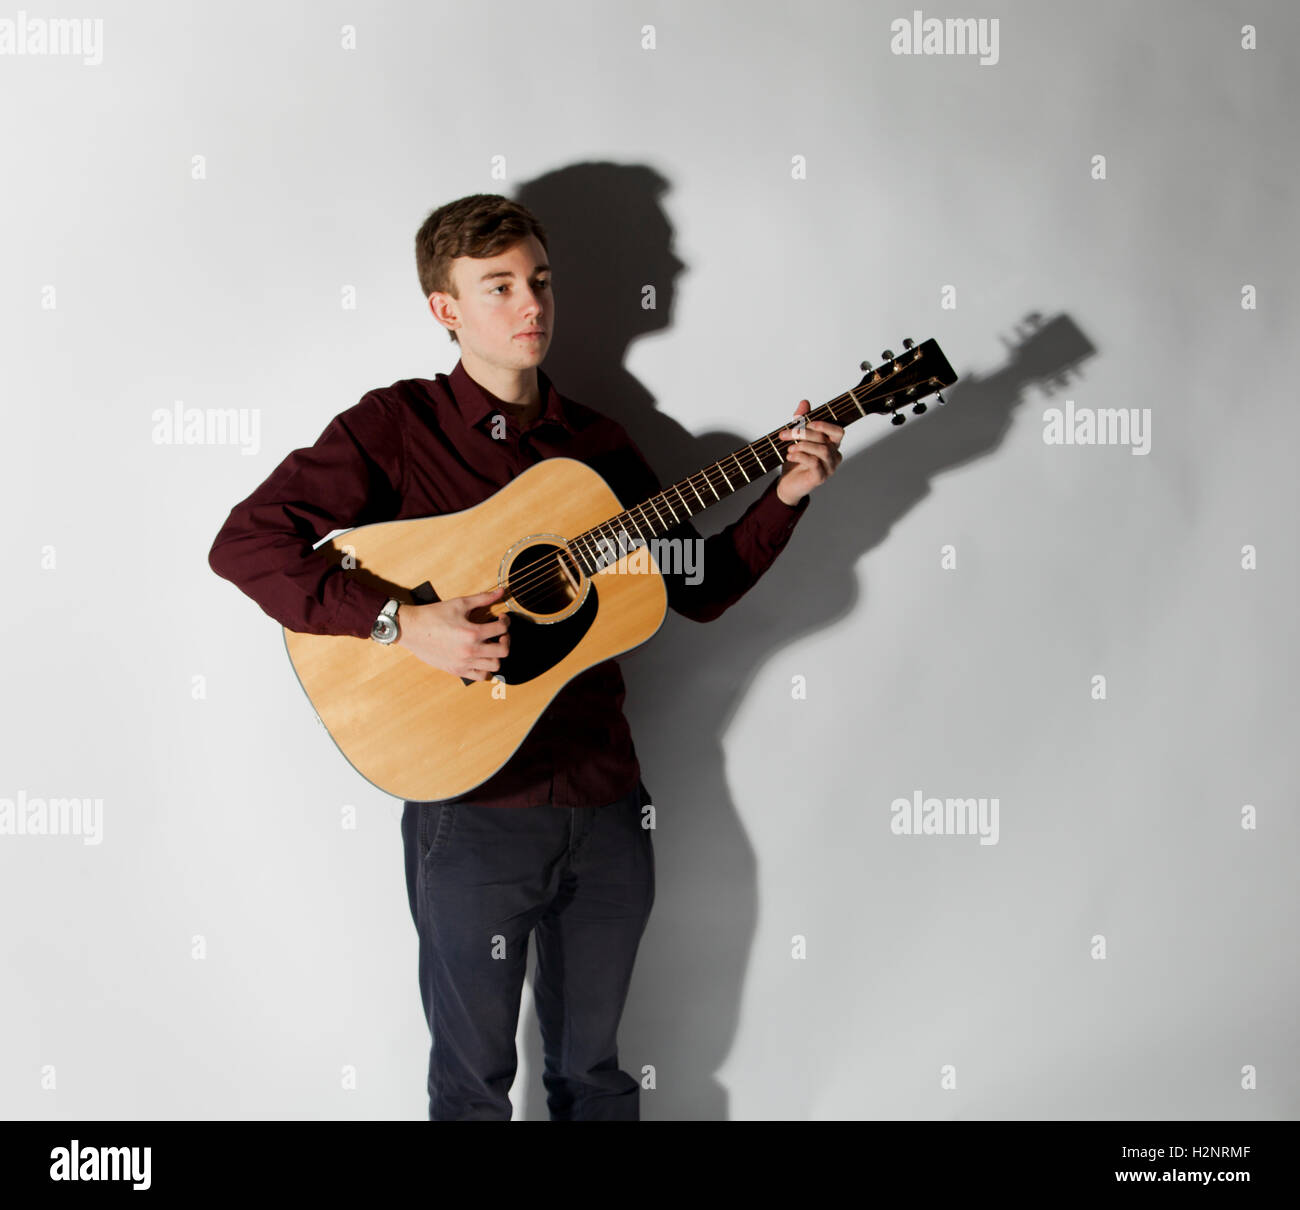 Joel Young in studio holding a guitar with a drop shadow behind. Inspired by Jake Bugg's album cover. Stock Photo